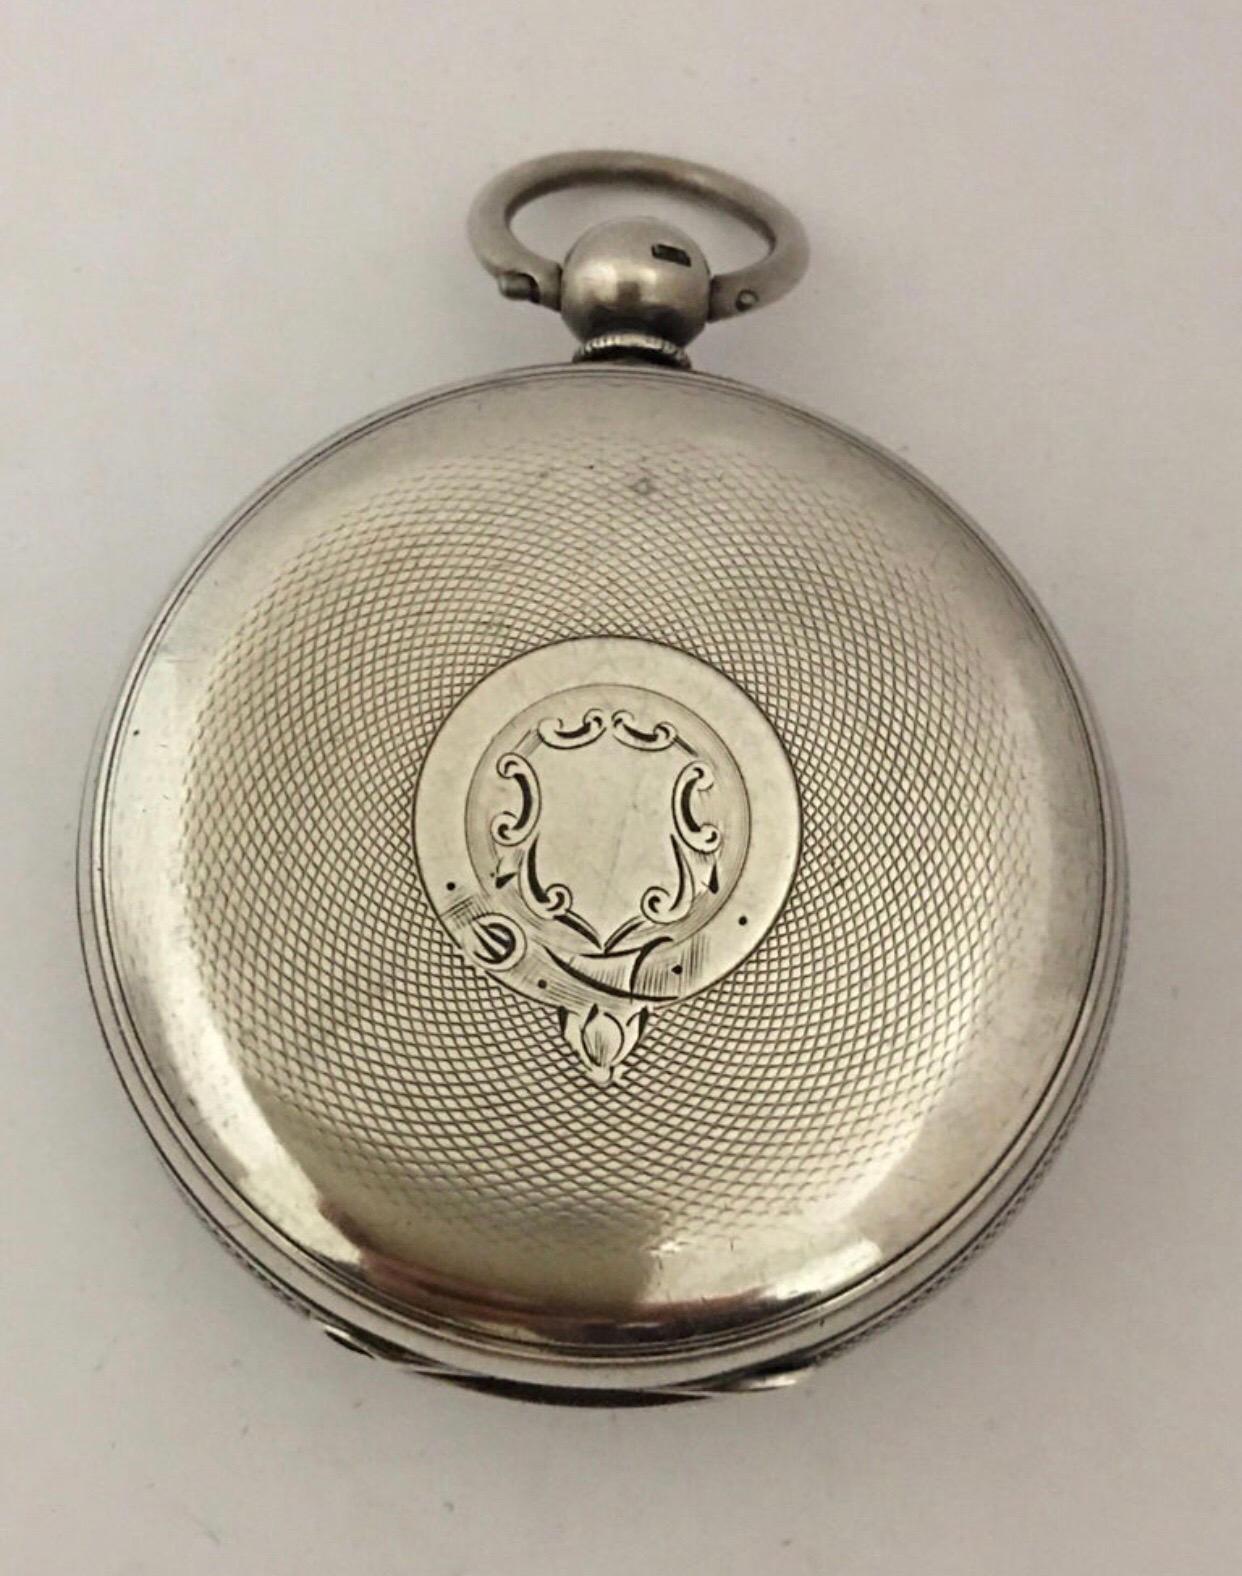 This beautiful 58mm watch diameter antique silver key-wind pocket watch is in good working condition. It has recently been serviced and it is running well.  Visible signs of aged and gentle used as shown. Unsigned movement number 2827 which is the